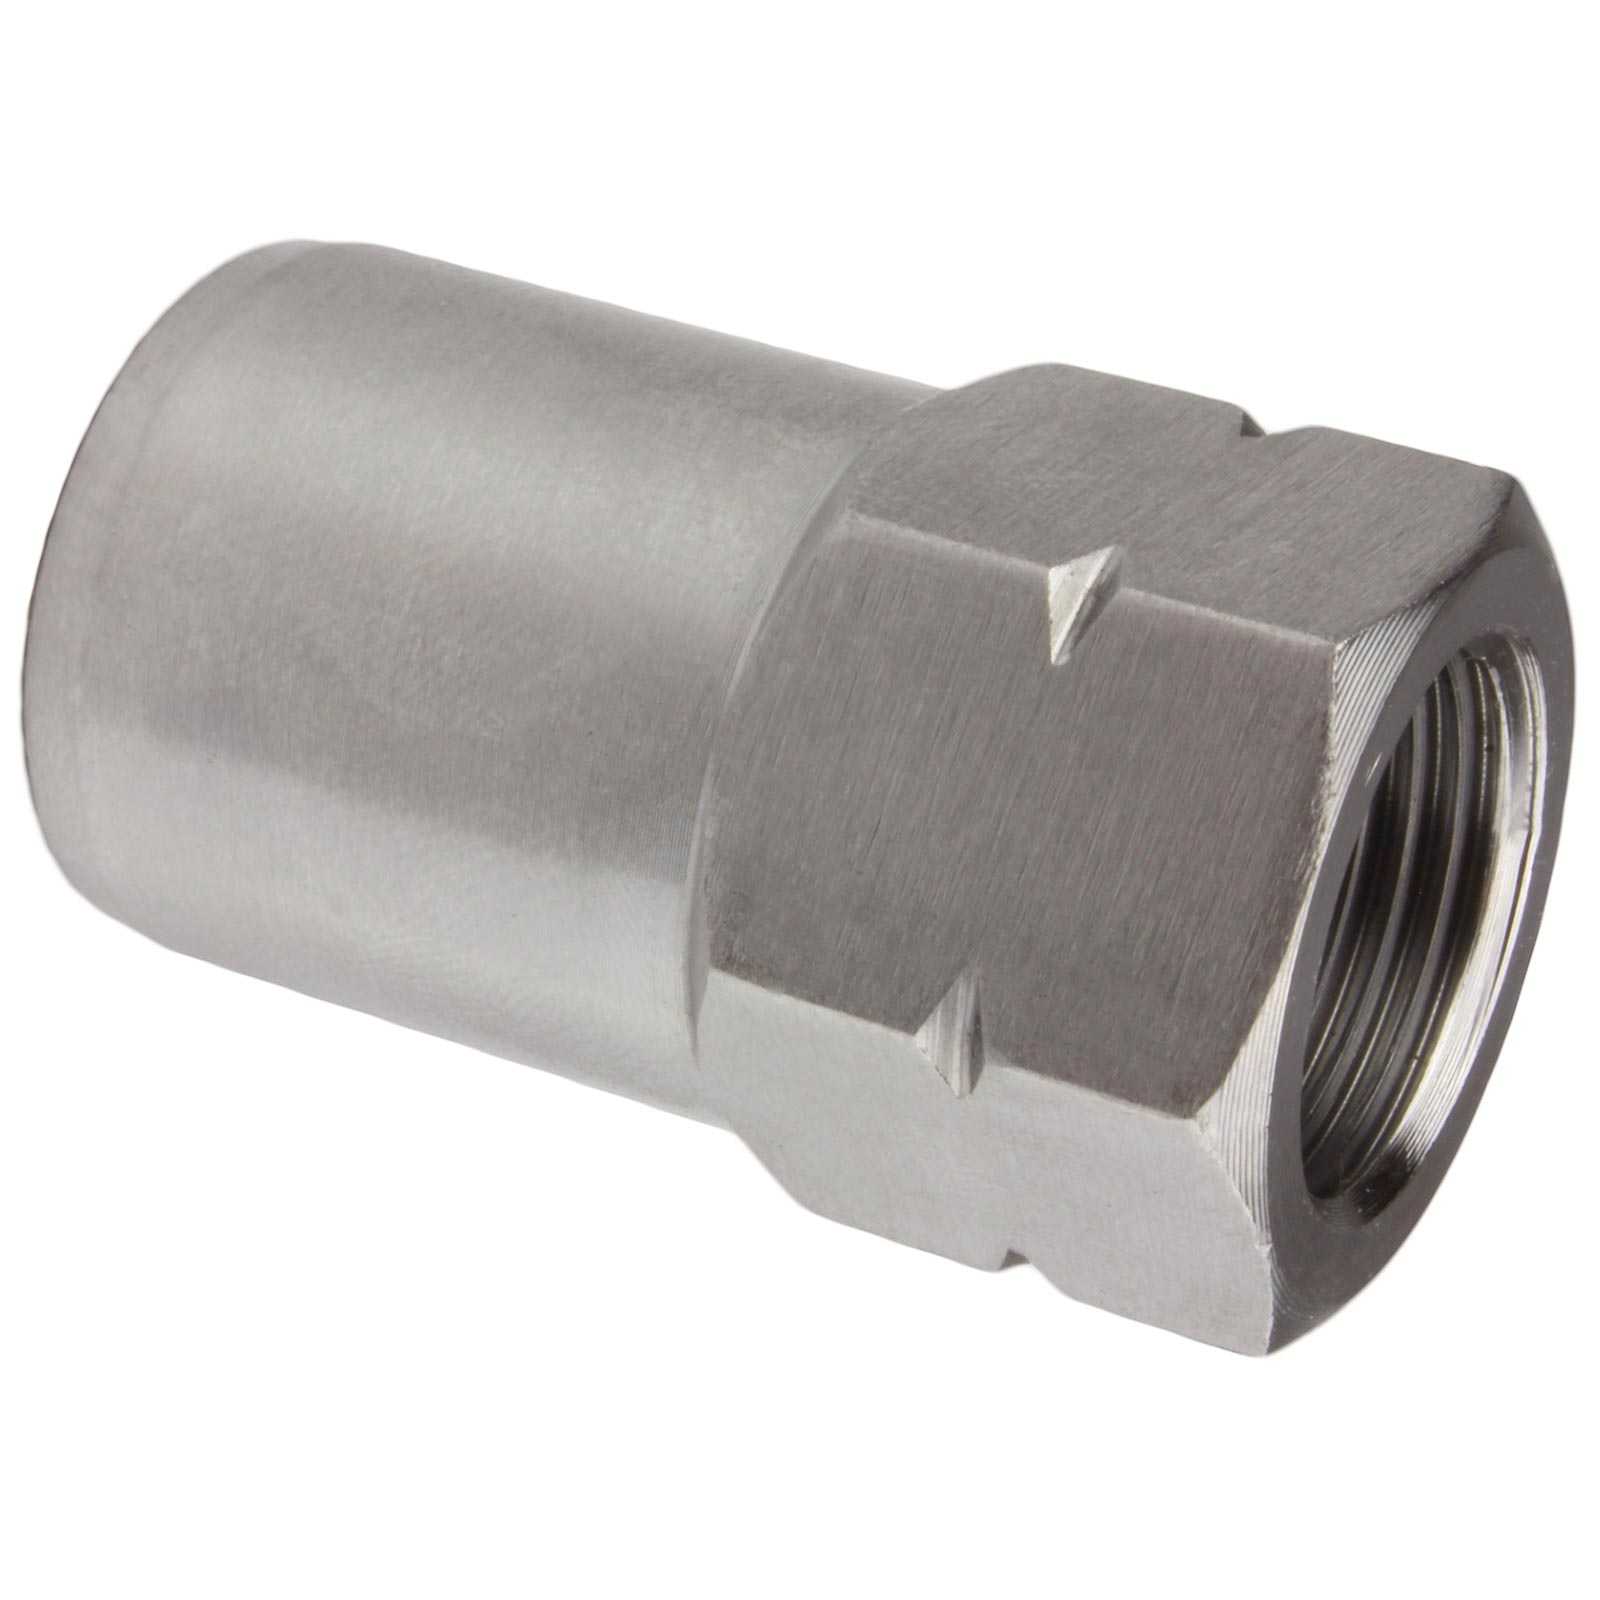 .250 wall or 1 ID Hole LH 3/4-16 Thread Tube Adapter,fits 1-1/2" OD Tube w